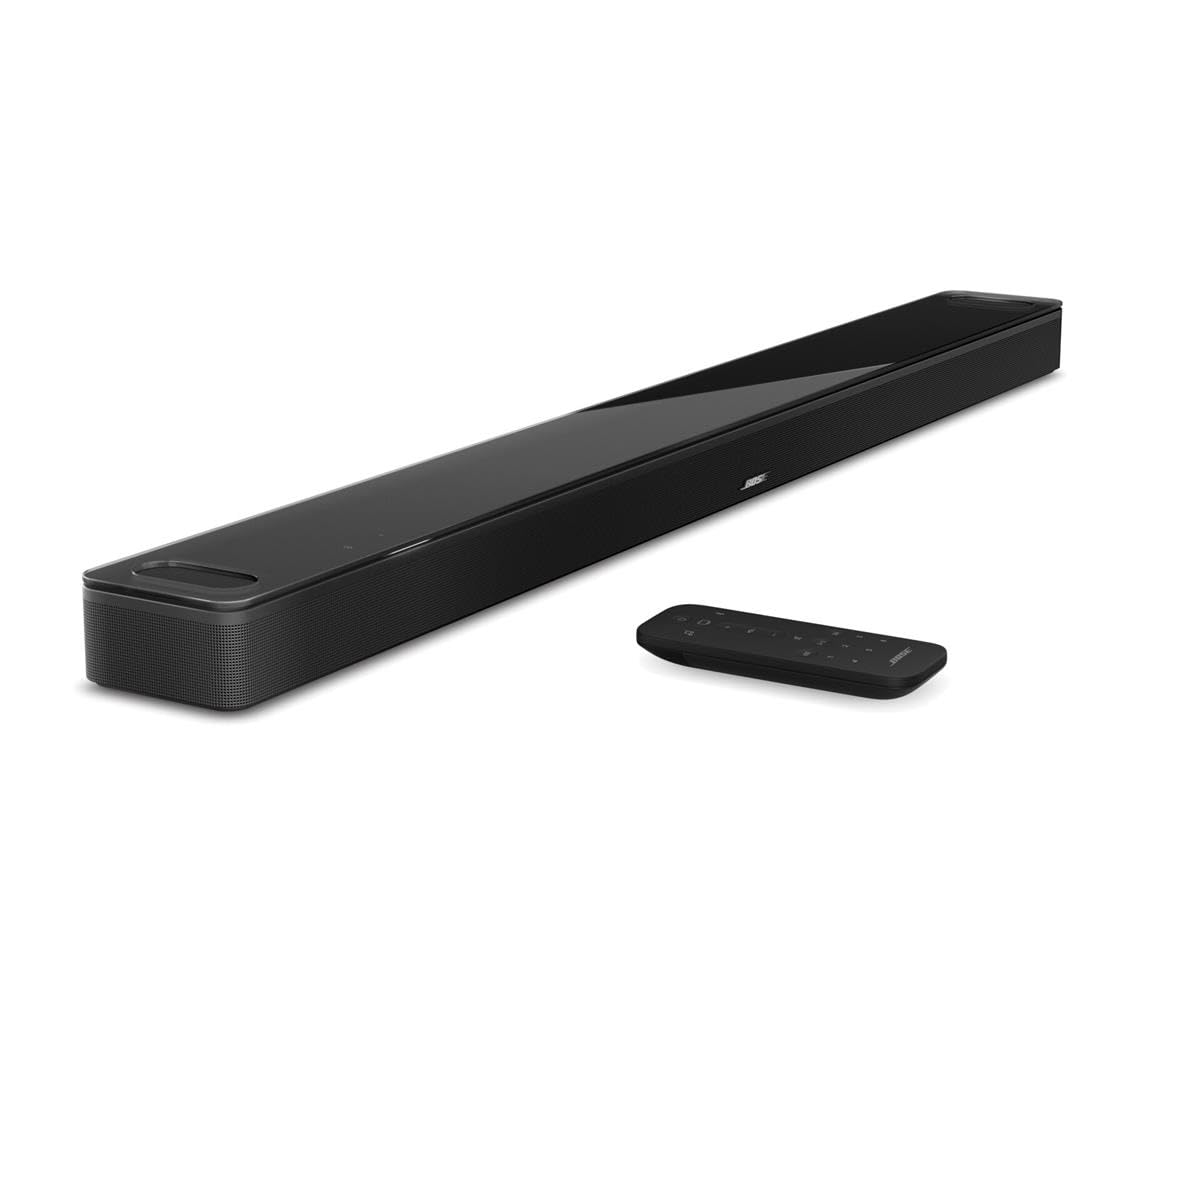 Smart Ultra Dolby Atmos Soundbar, Black, Bundle with Bass Module 700 and 2X Surround Speakers 700